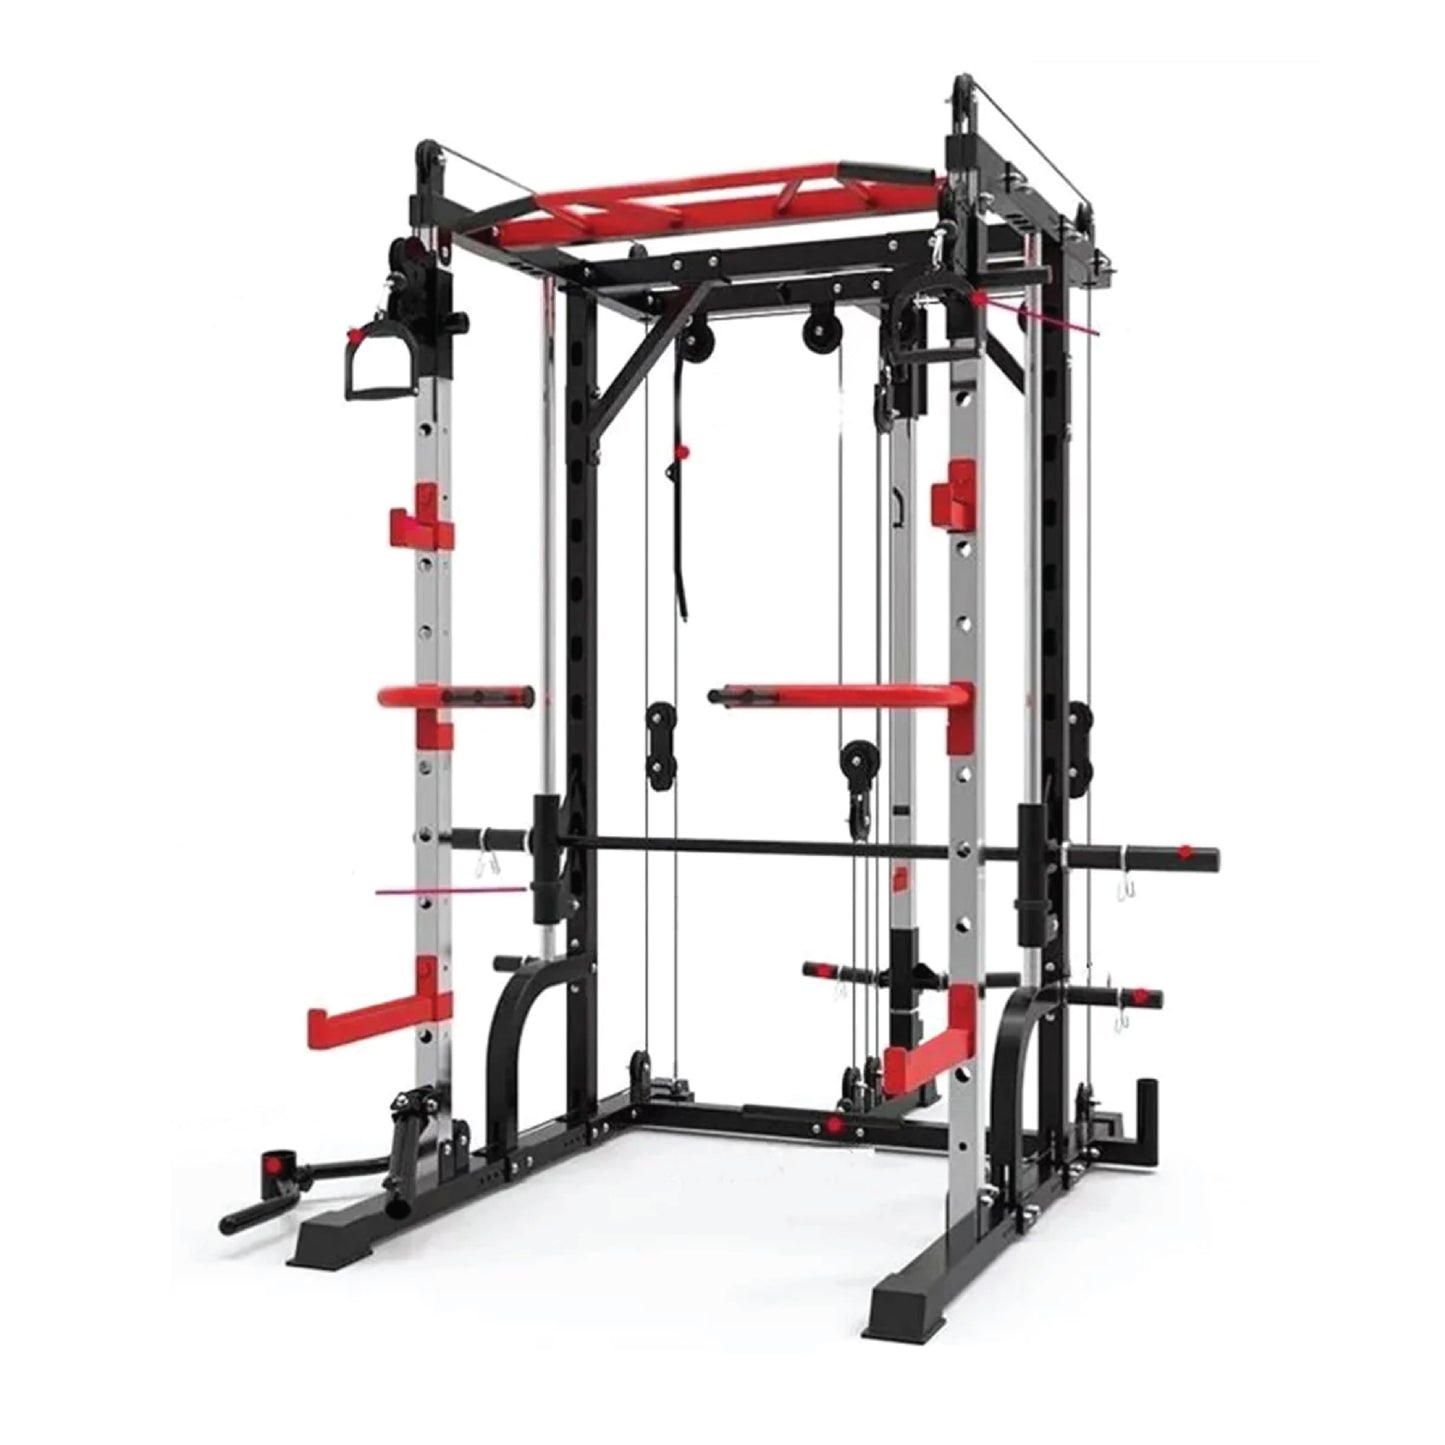 Combo Deal | 1441 Fitness Smith Machine with Functional Trainer and Squat Rack J009 + 80kg Apus Bumper Plates + Adjustable Bench A8007 + 15 MM Flooring